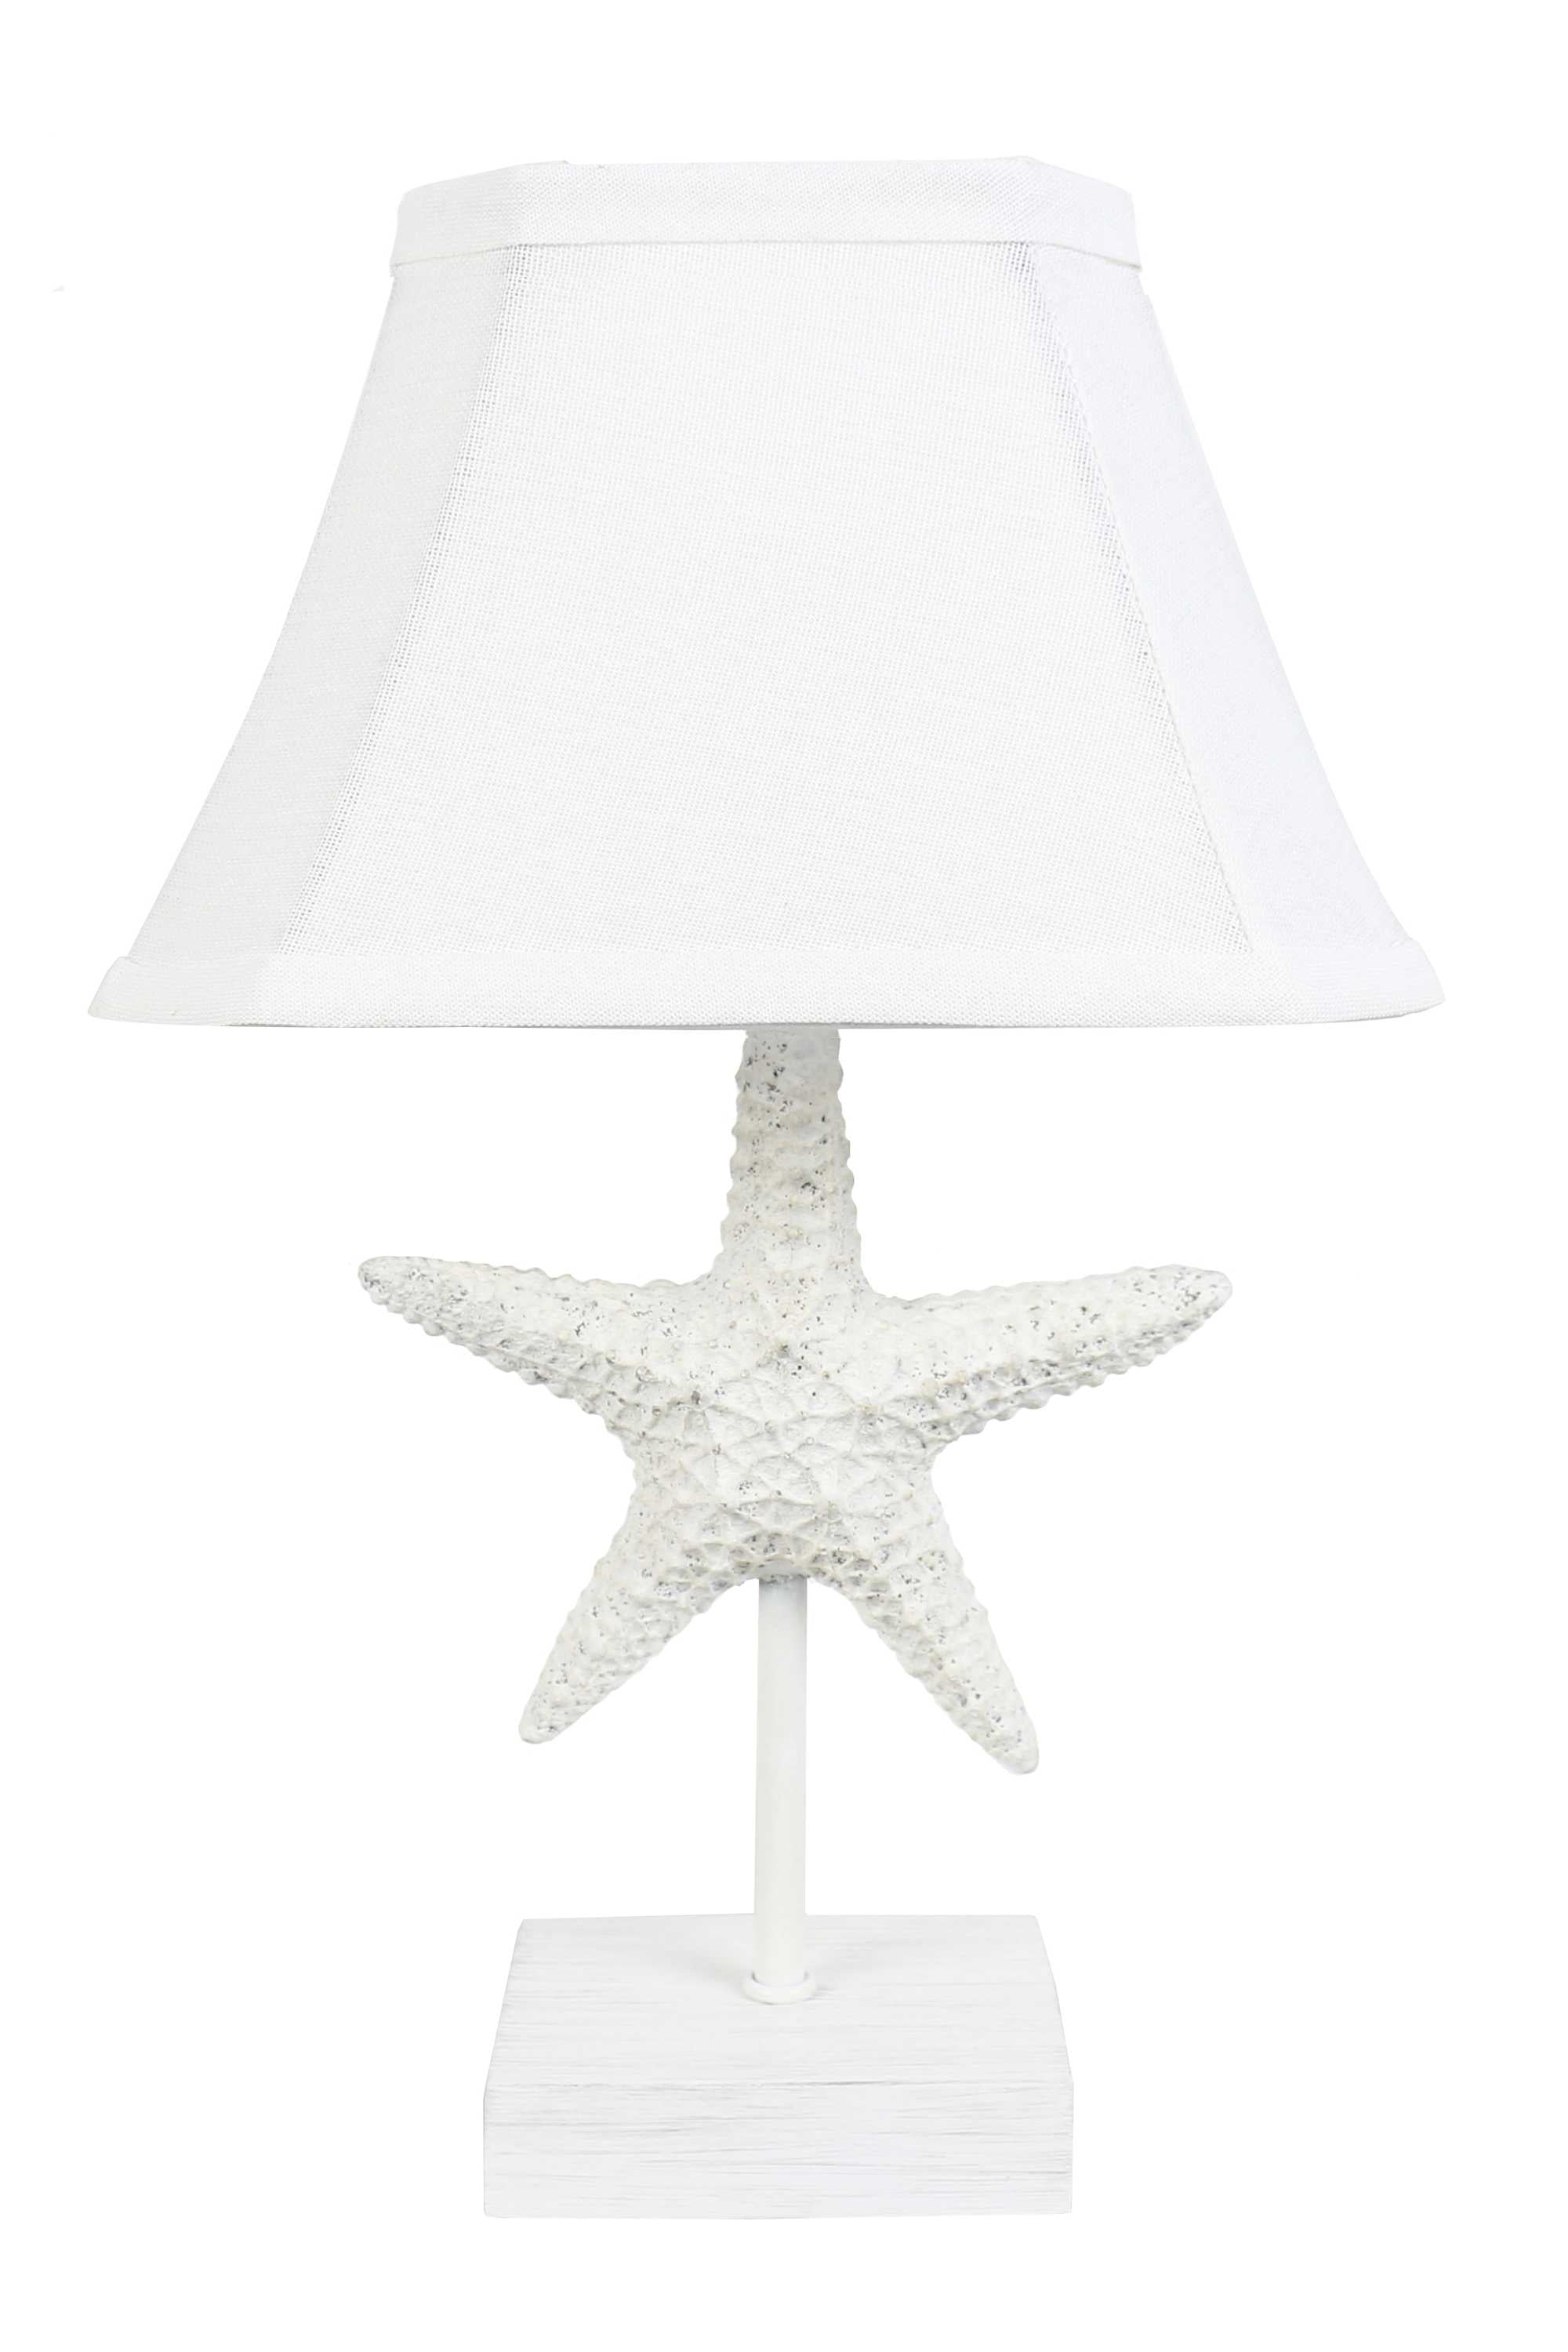 13" White Table Lamp With White Bell Shade